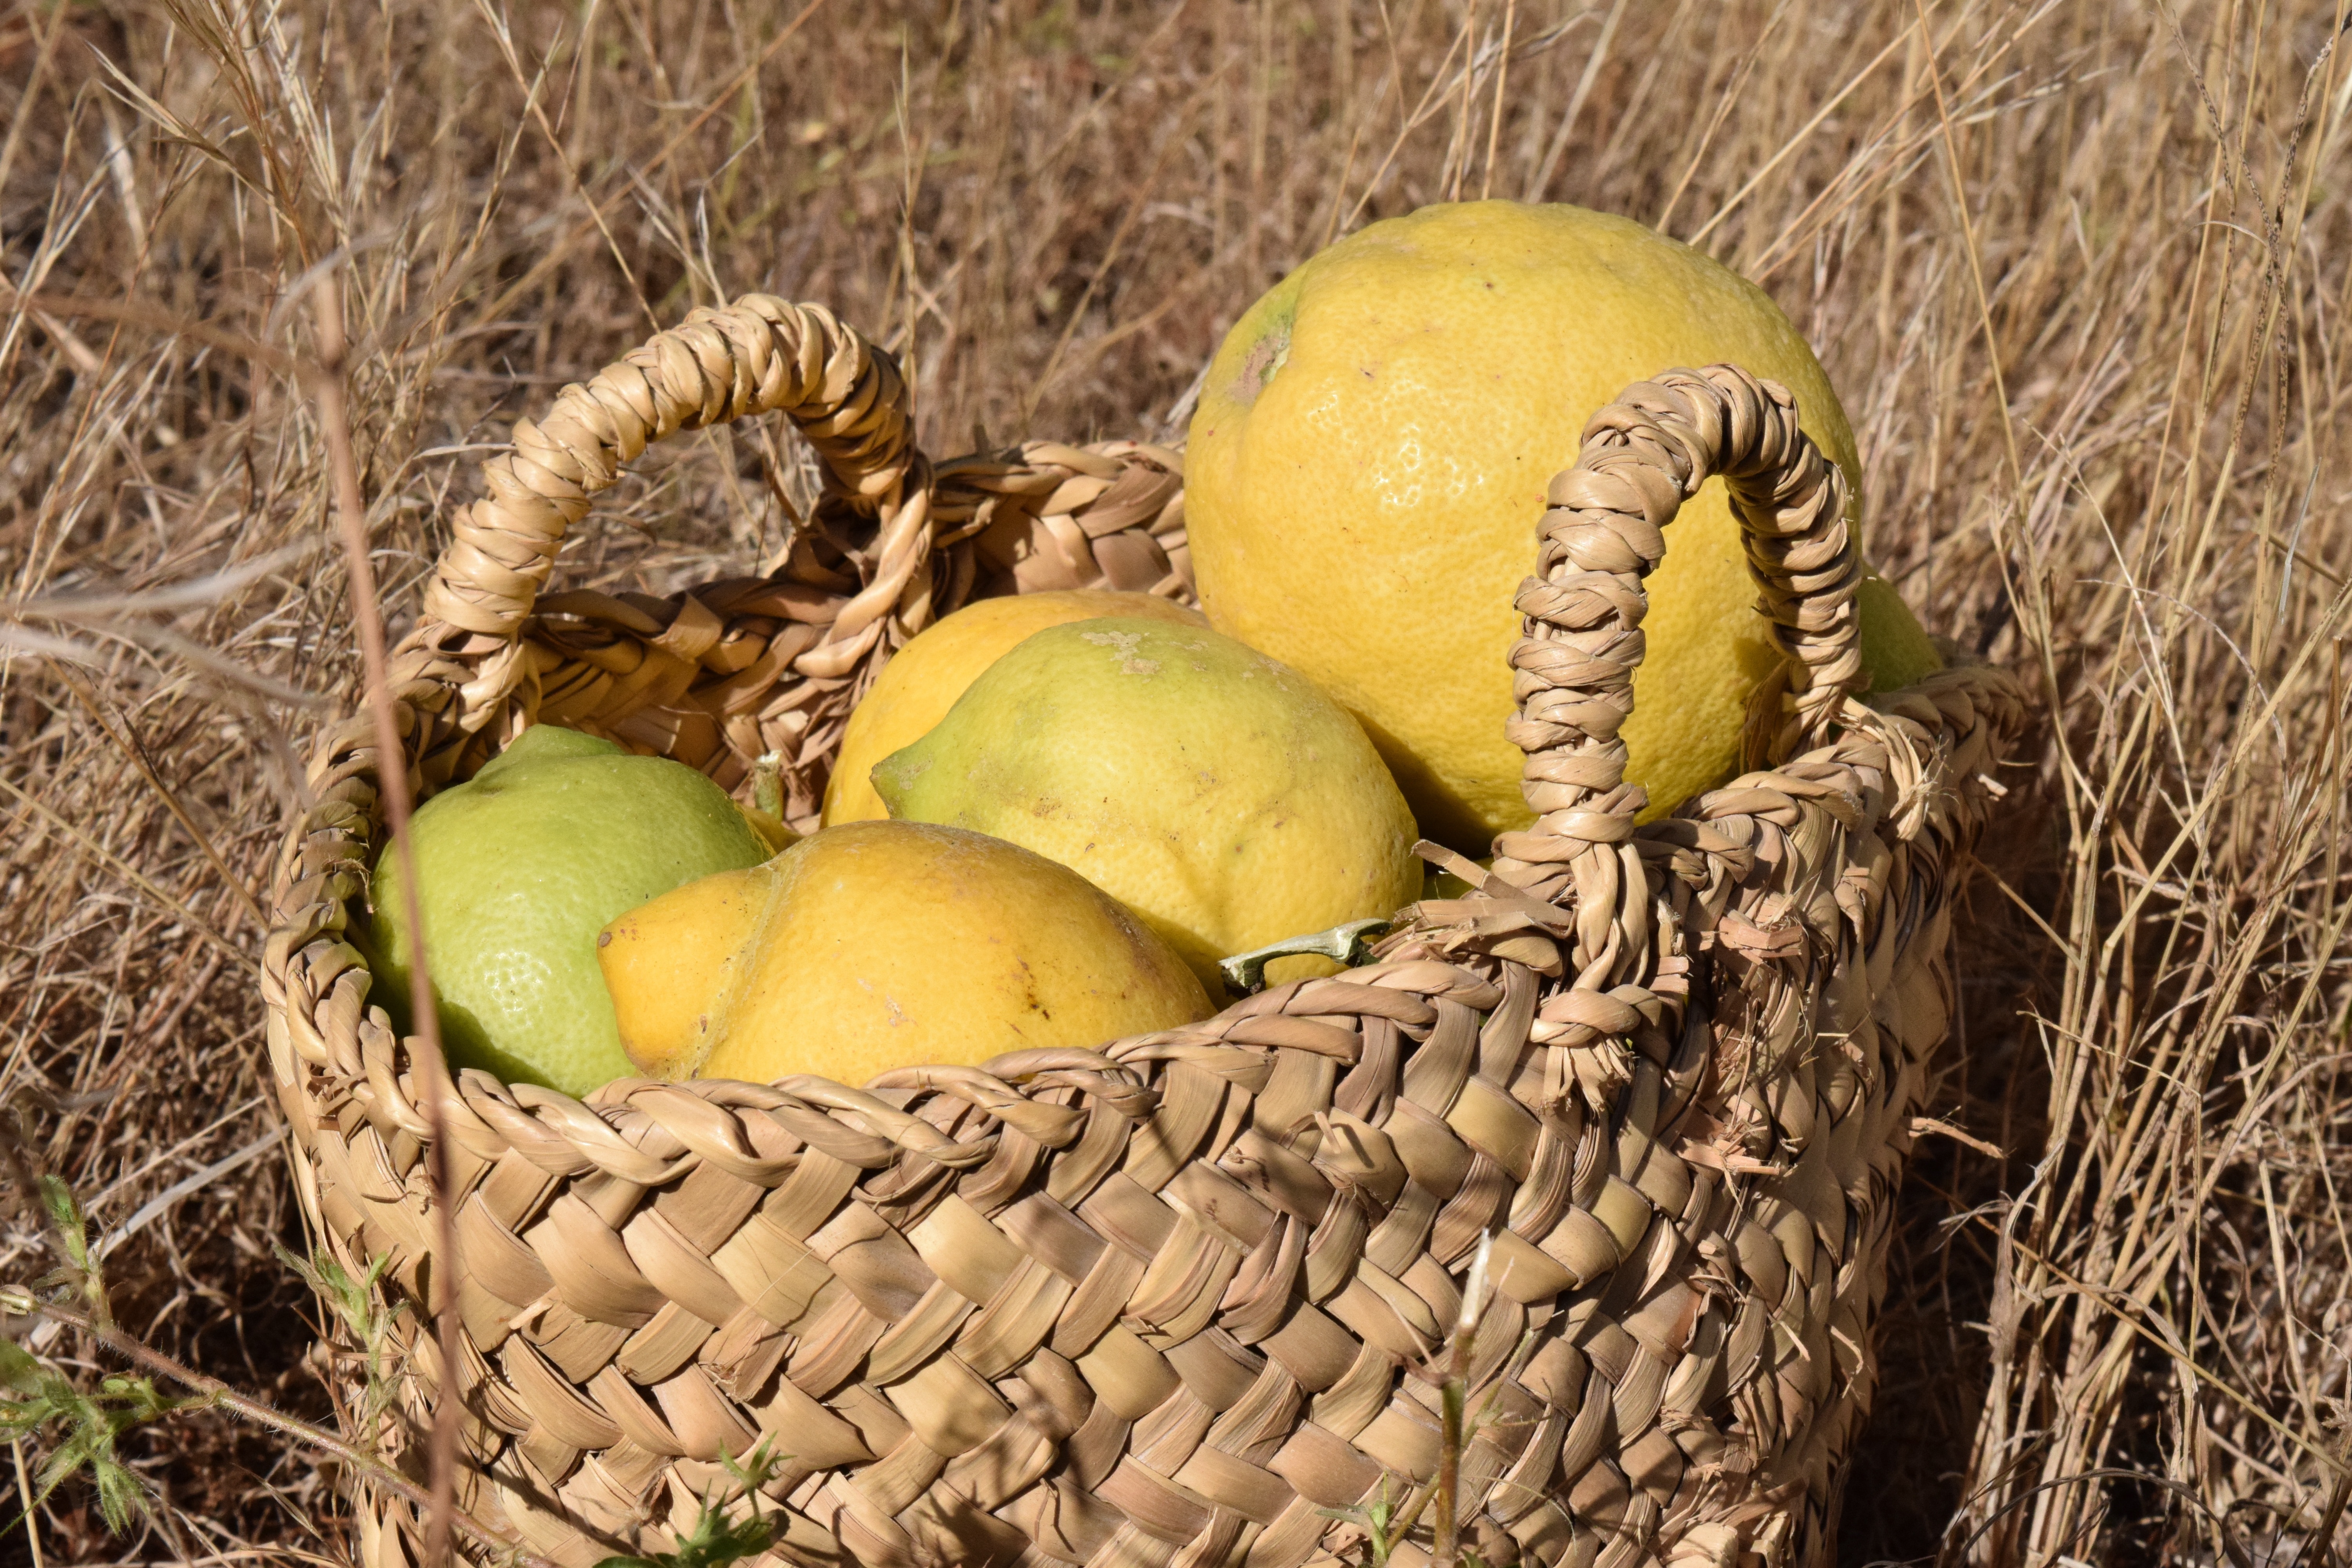 round yellow and green fruits on brown wicket basket